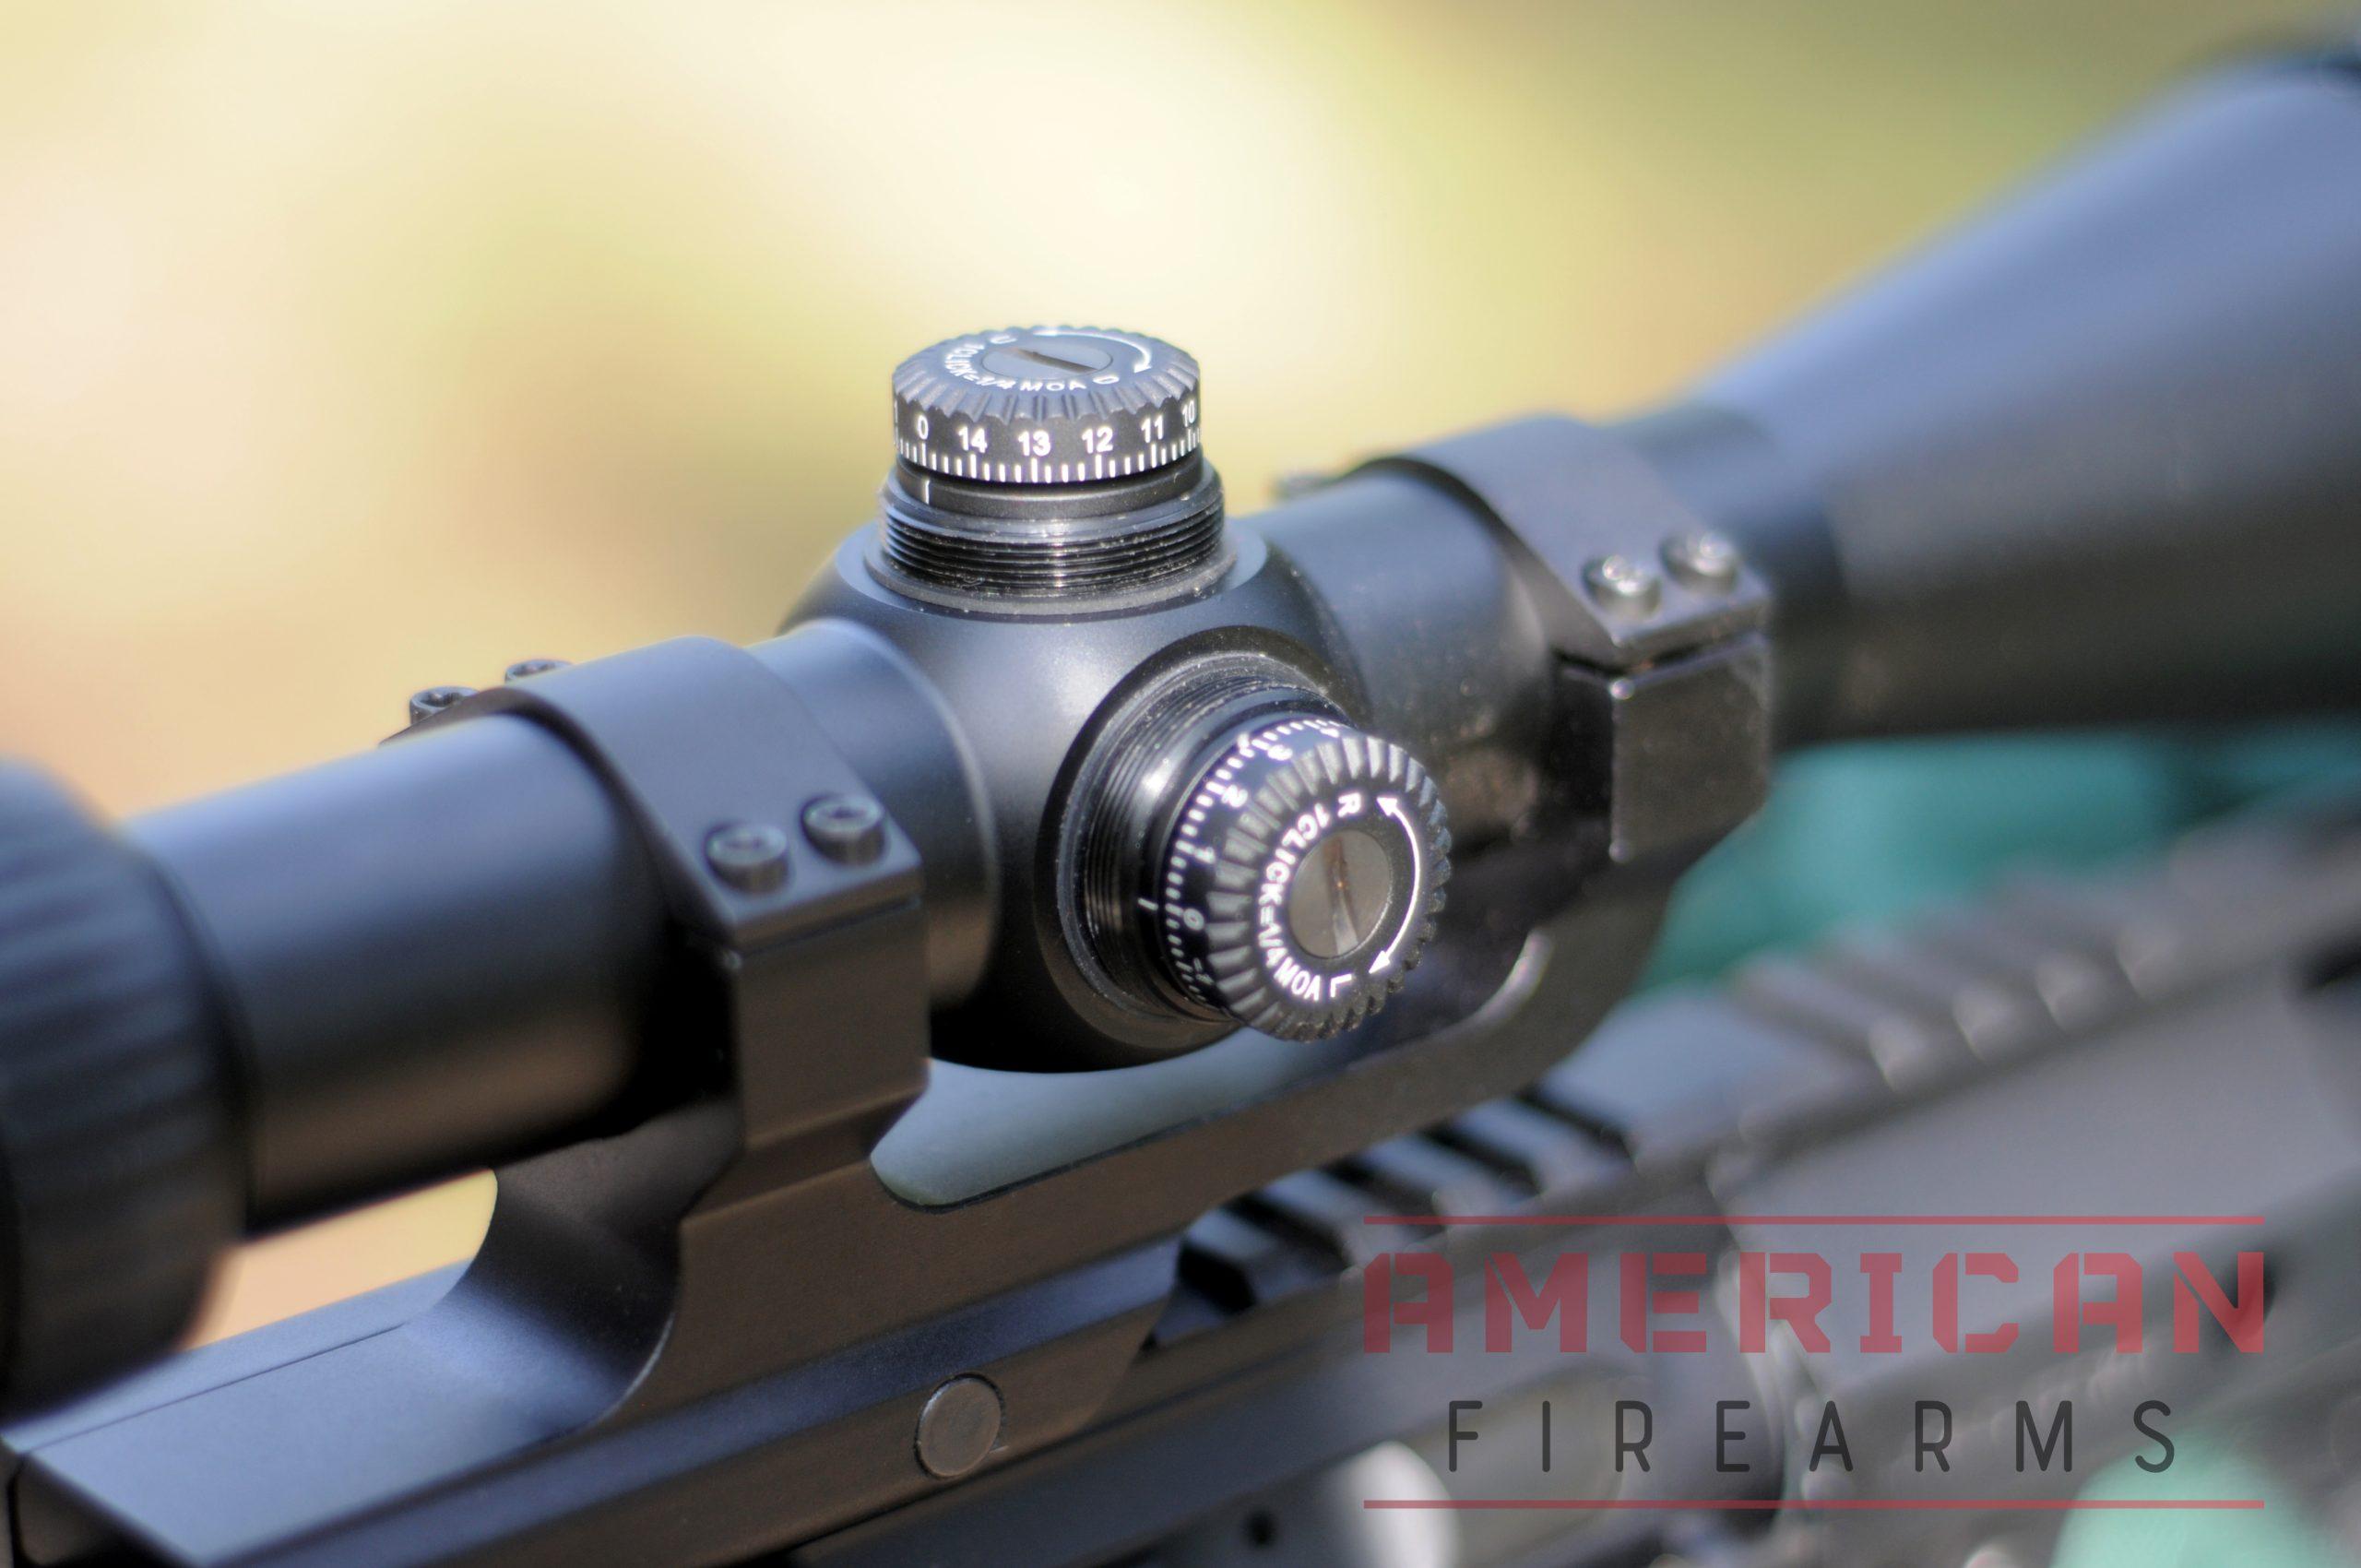 The Vortex CrossFire windage and elevation turrets gives you 1/4 MOA adjustments.